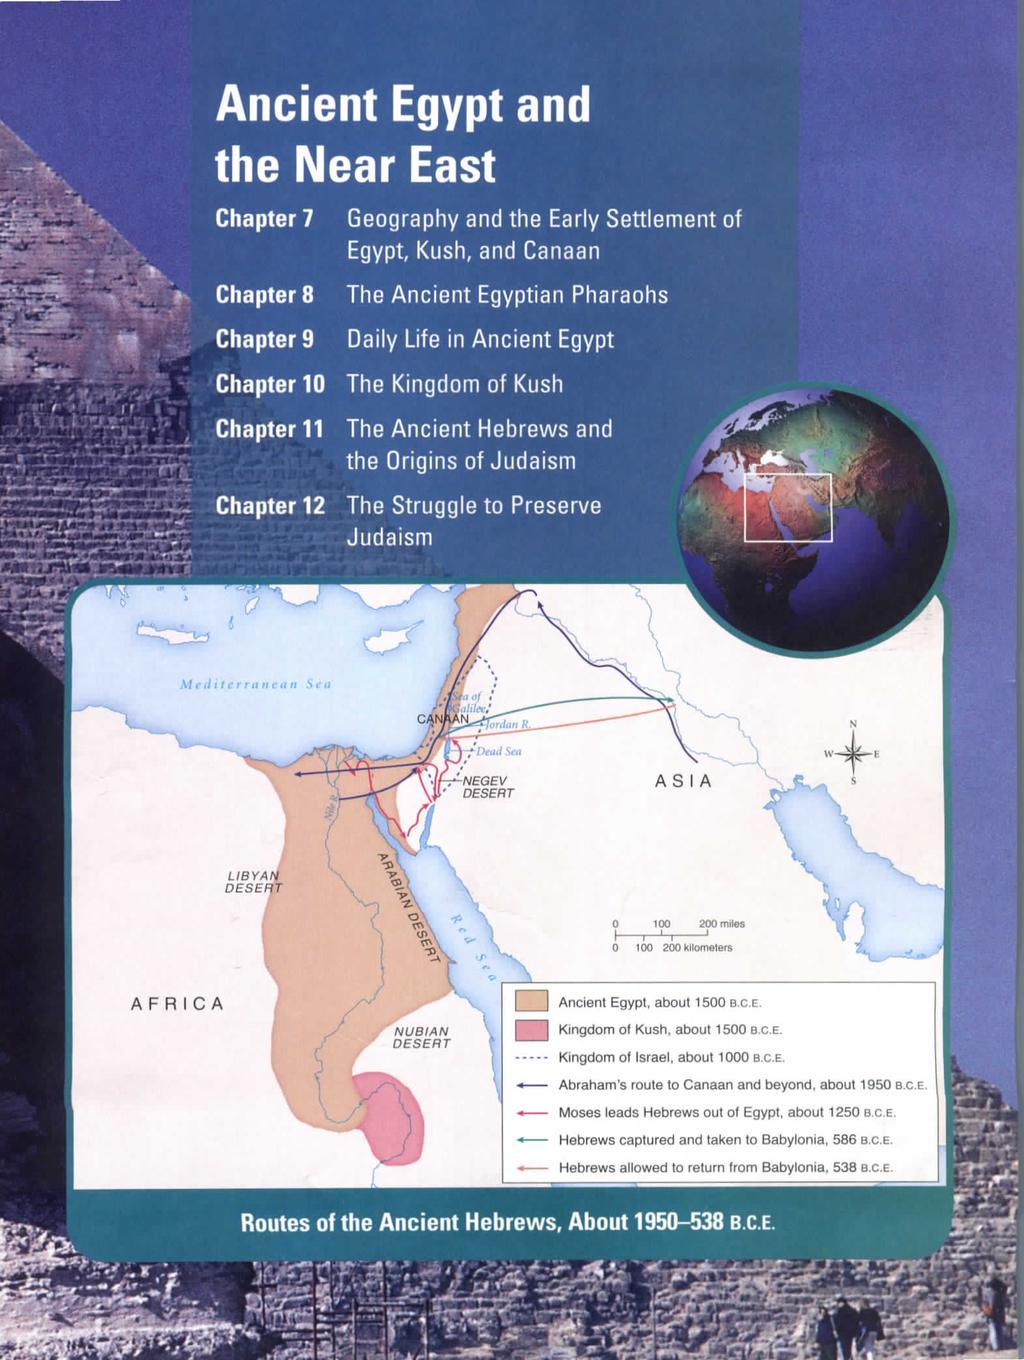 Ancient Egypt and the Near East Chapter 7 Chapter 8 Chapter 9 Geography and the Early Settlement of Egypt, Kush, and Canaan The Ancient Egyptian P h a r a o h s Daily Life in Ancient Egypt Chapter 10